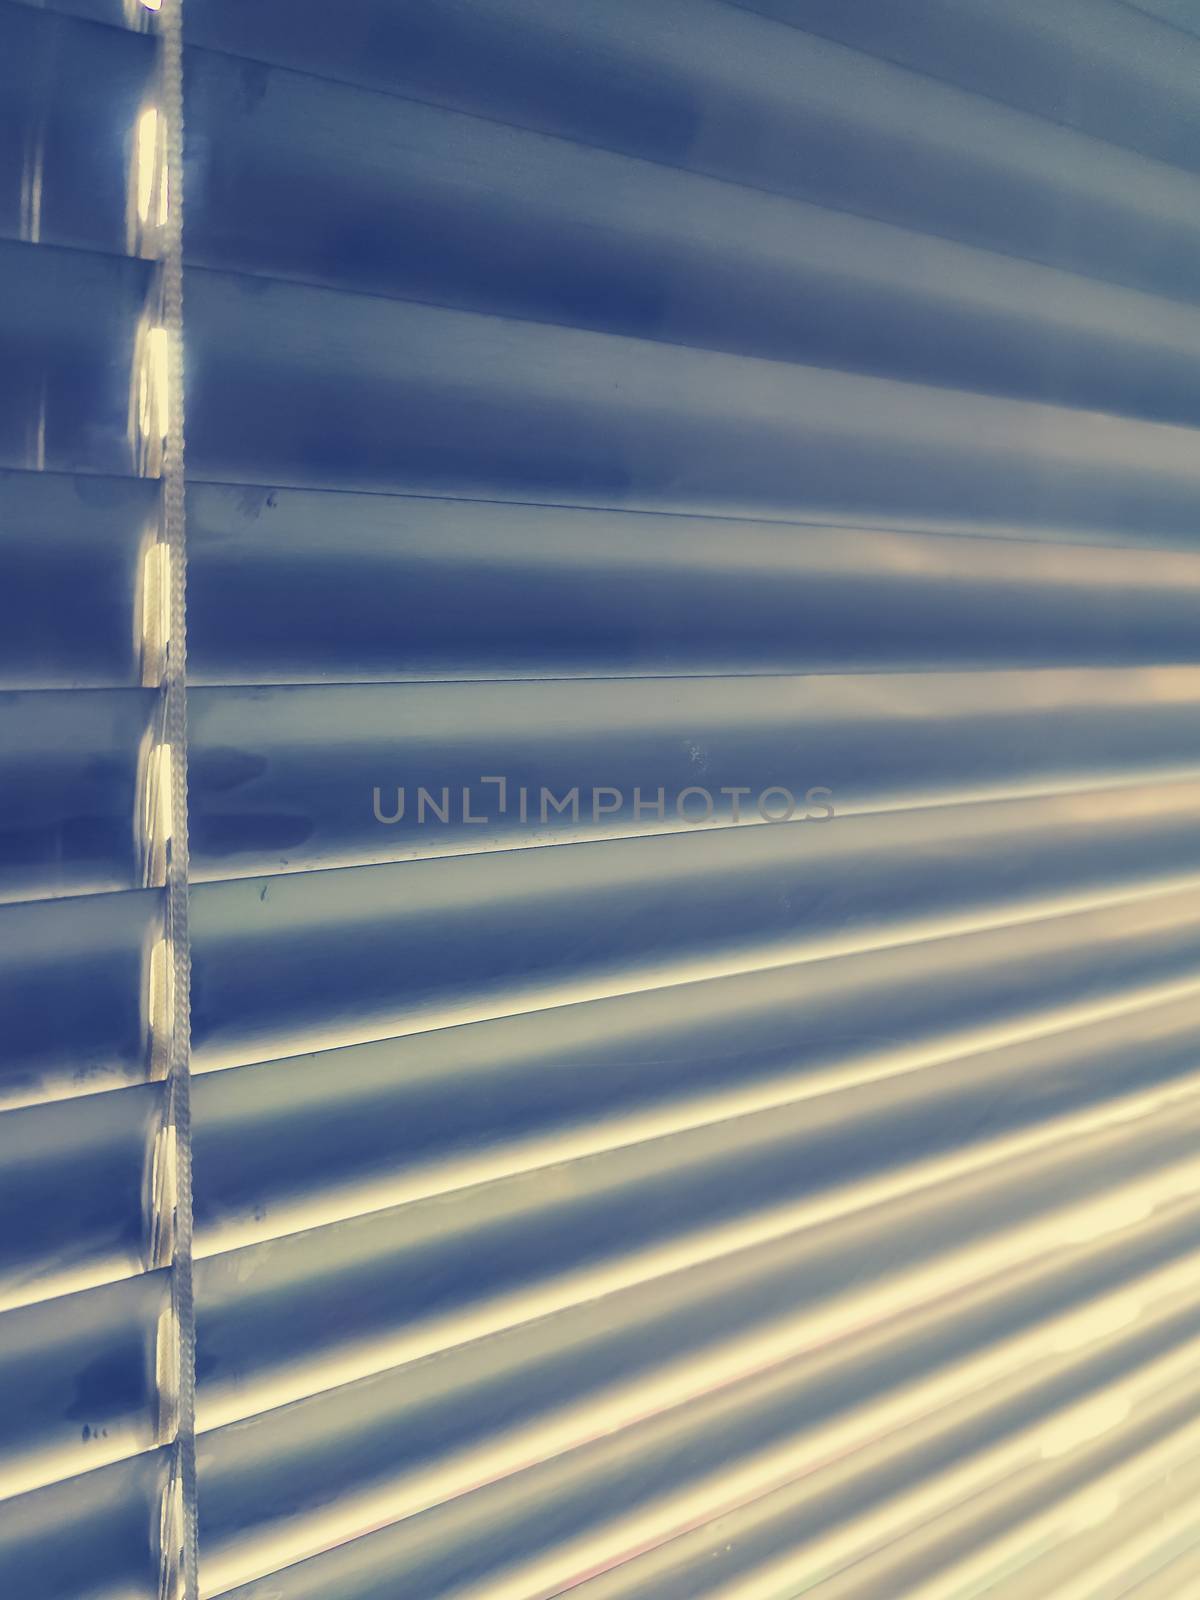 Sunblinds Silver aluminum louver on window horizontal pattern. Shutters On glass In The Office or home  interior